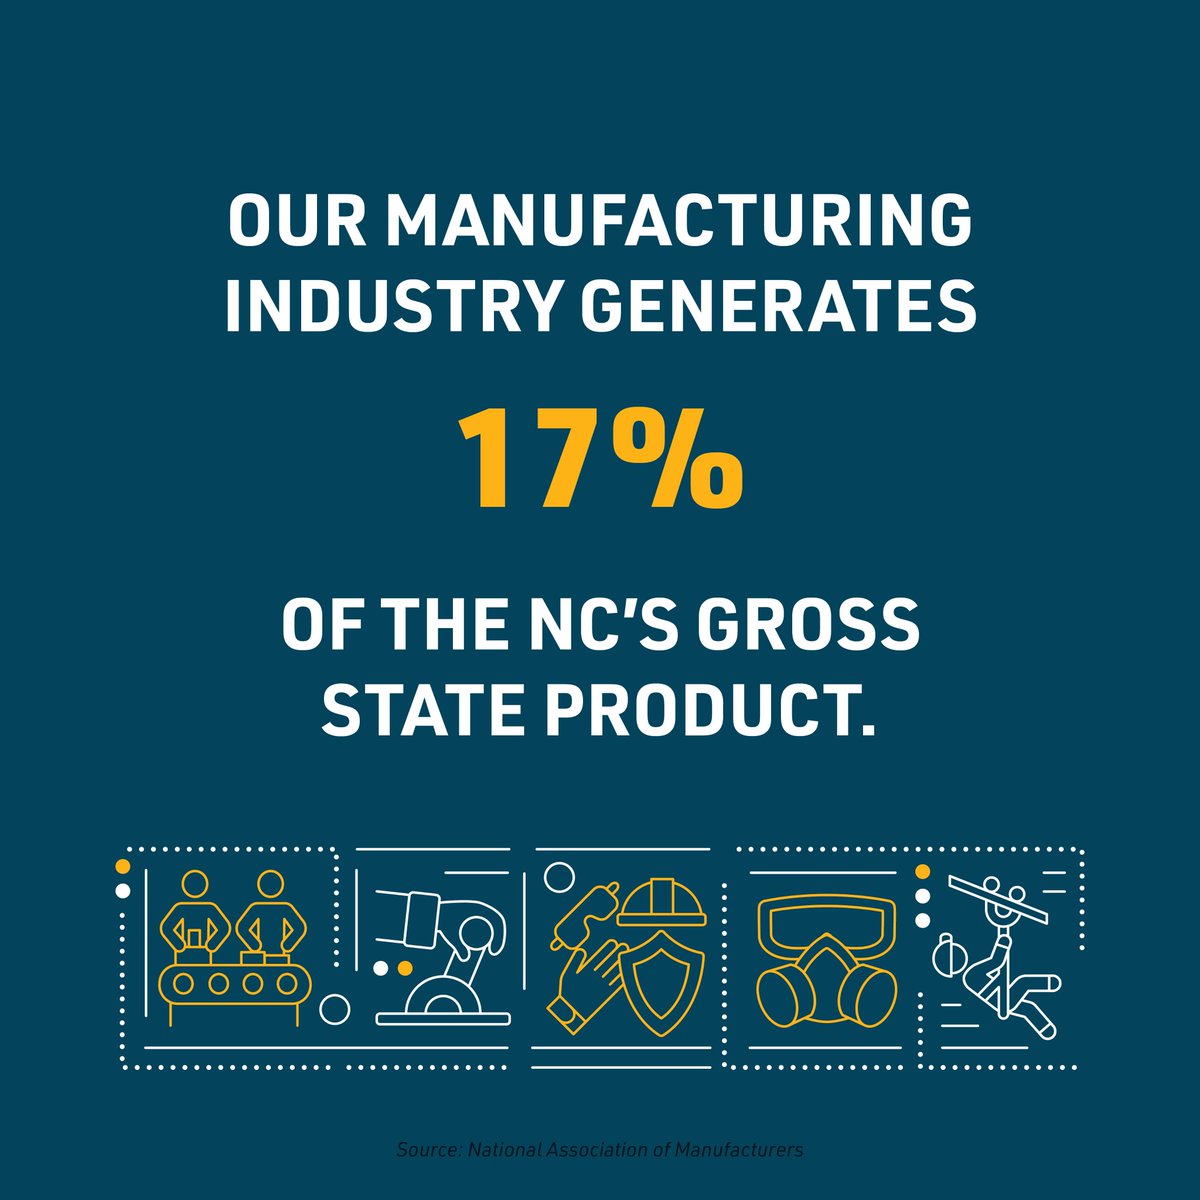 We're only 1 day away from National #MFGDay23! Here is today's #NC #manufacturing fun fact of the day.